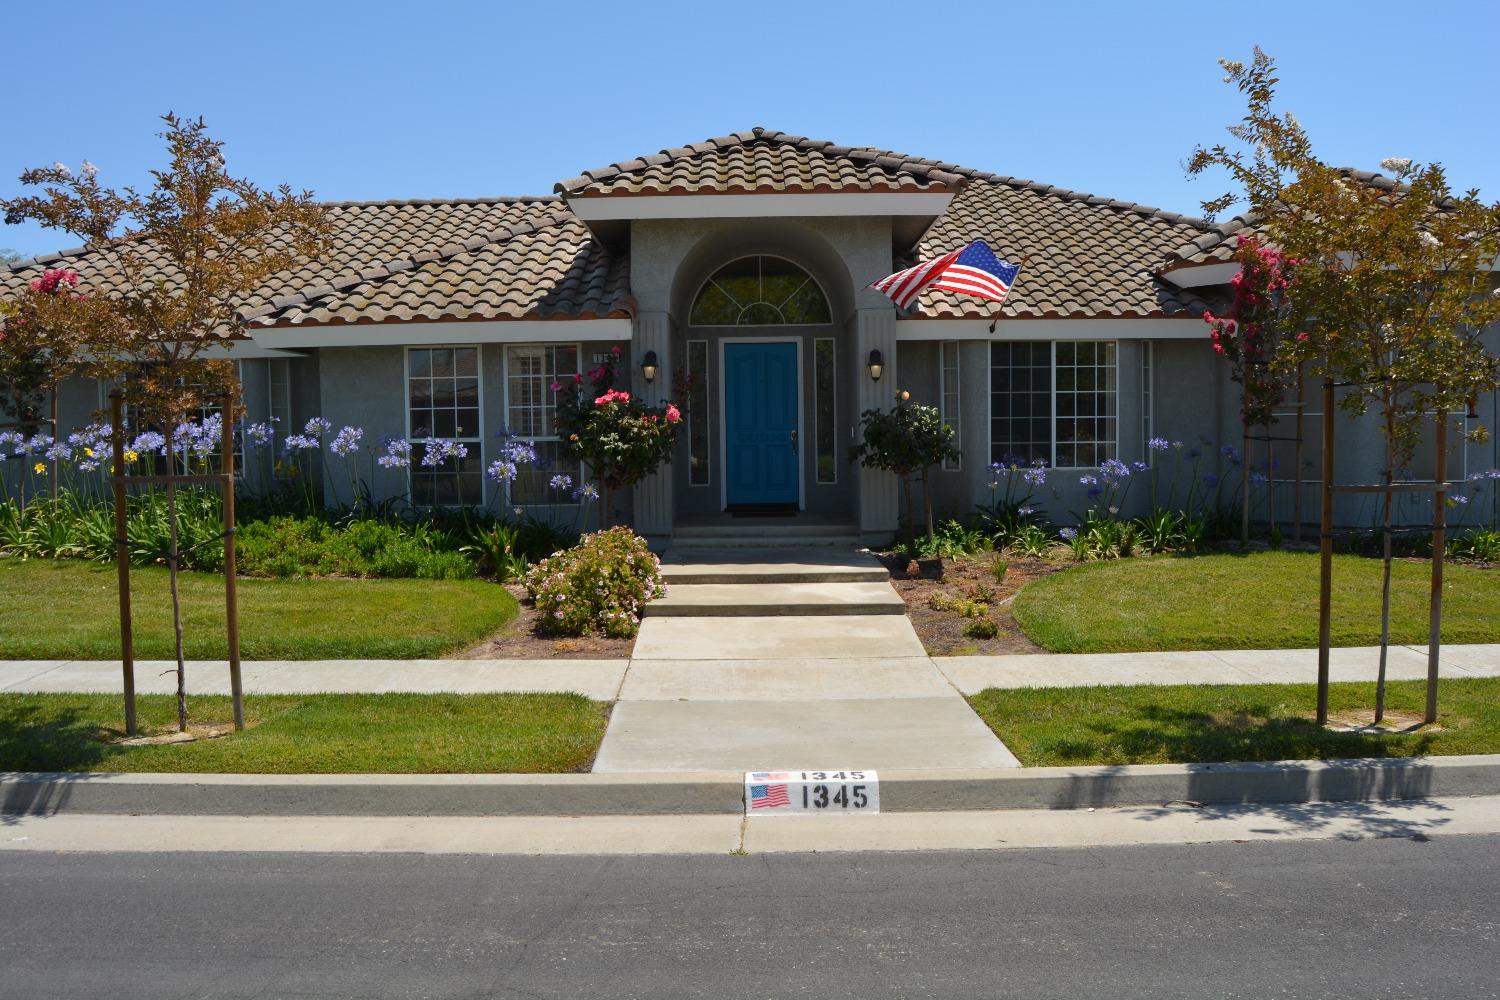 Photo of 1345 Lincoln Ln in Lemoore, CA